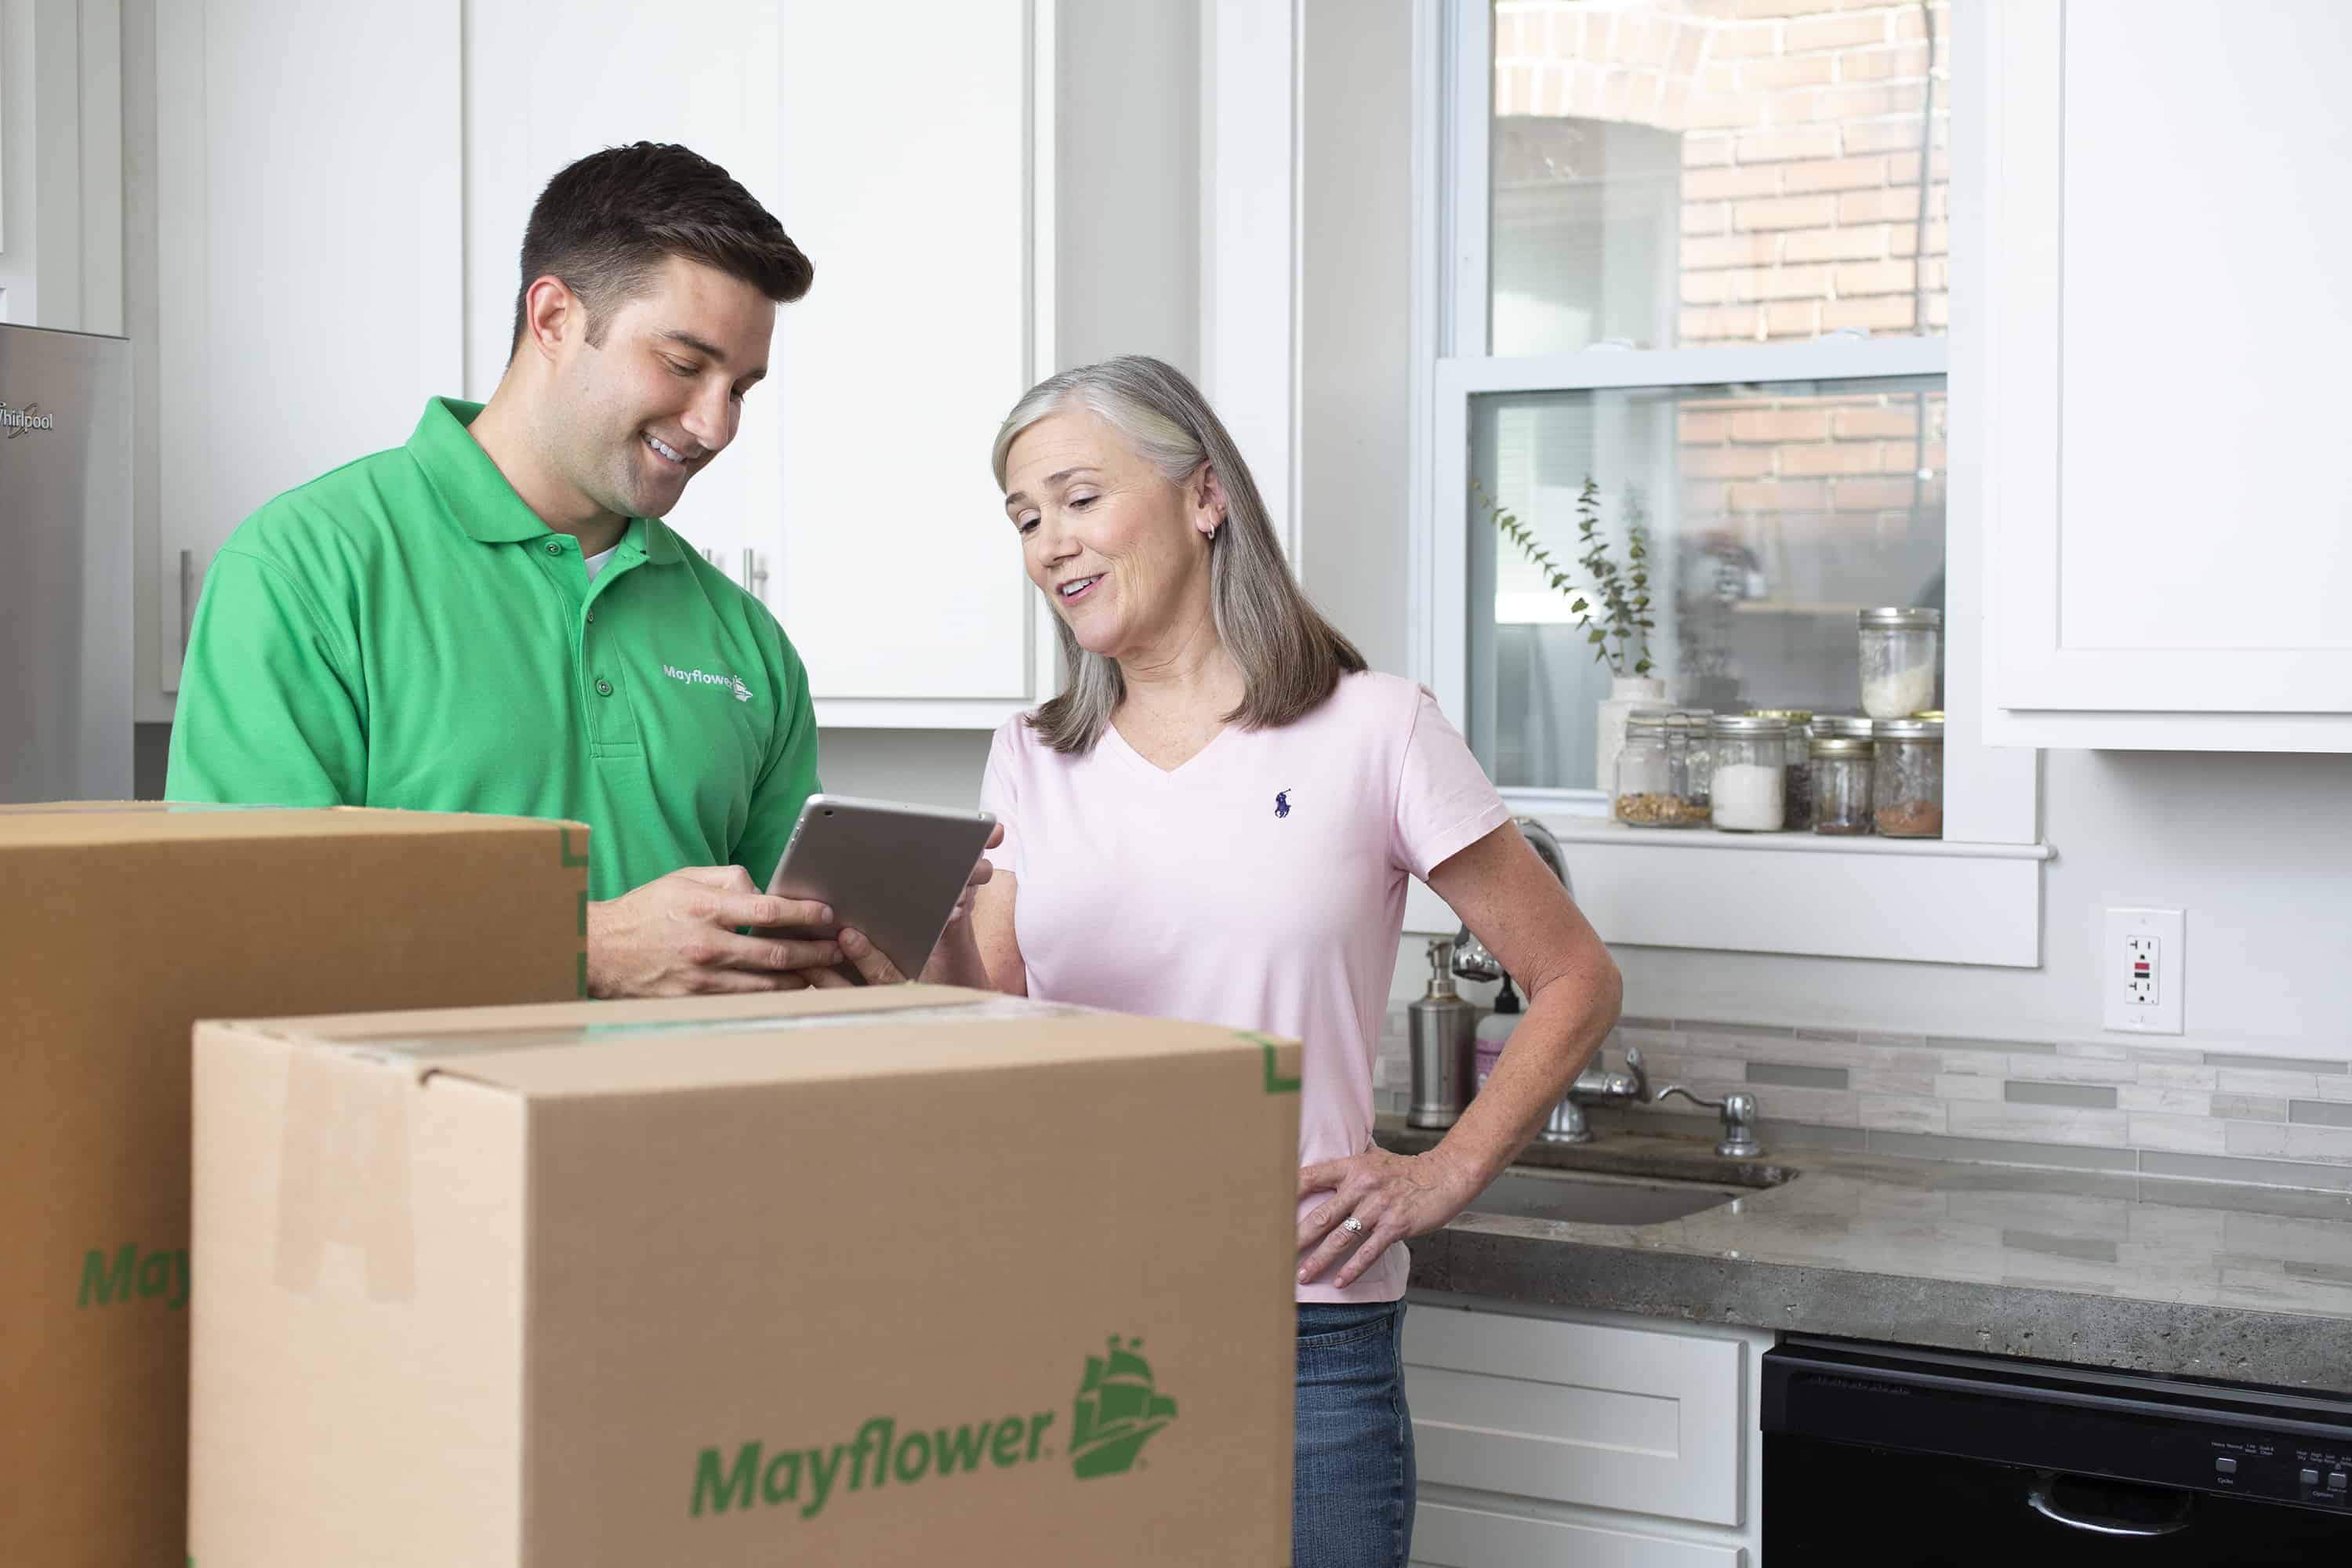 Male mover speaking with female customer in her kitchen - Mayflower®